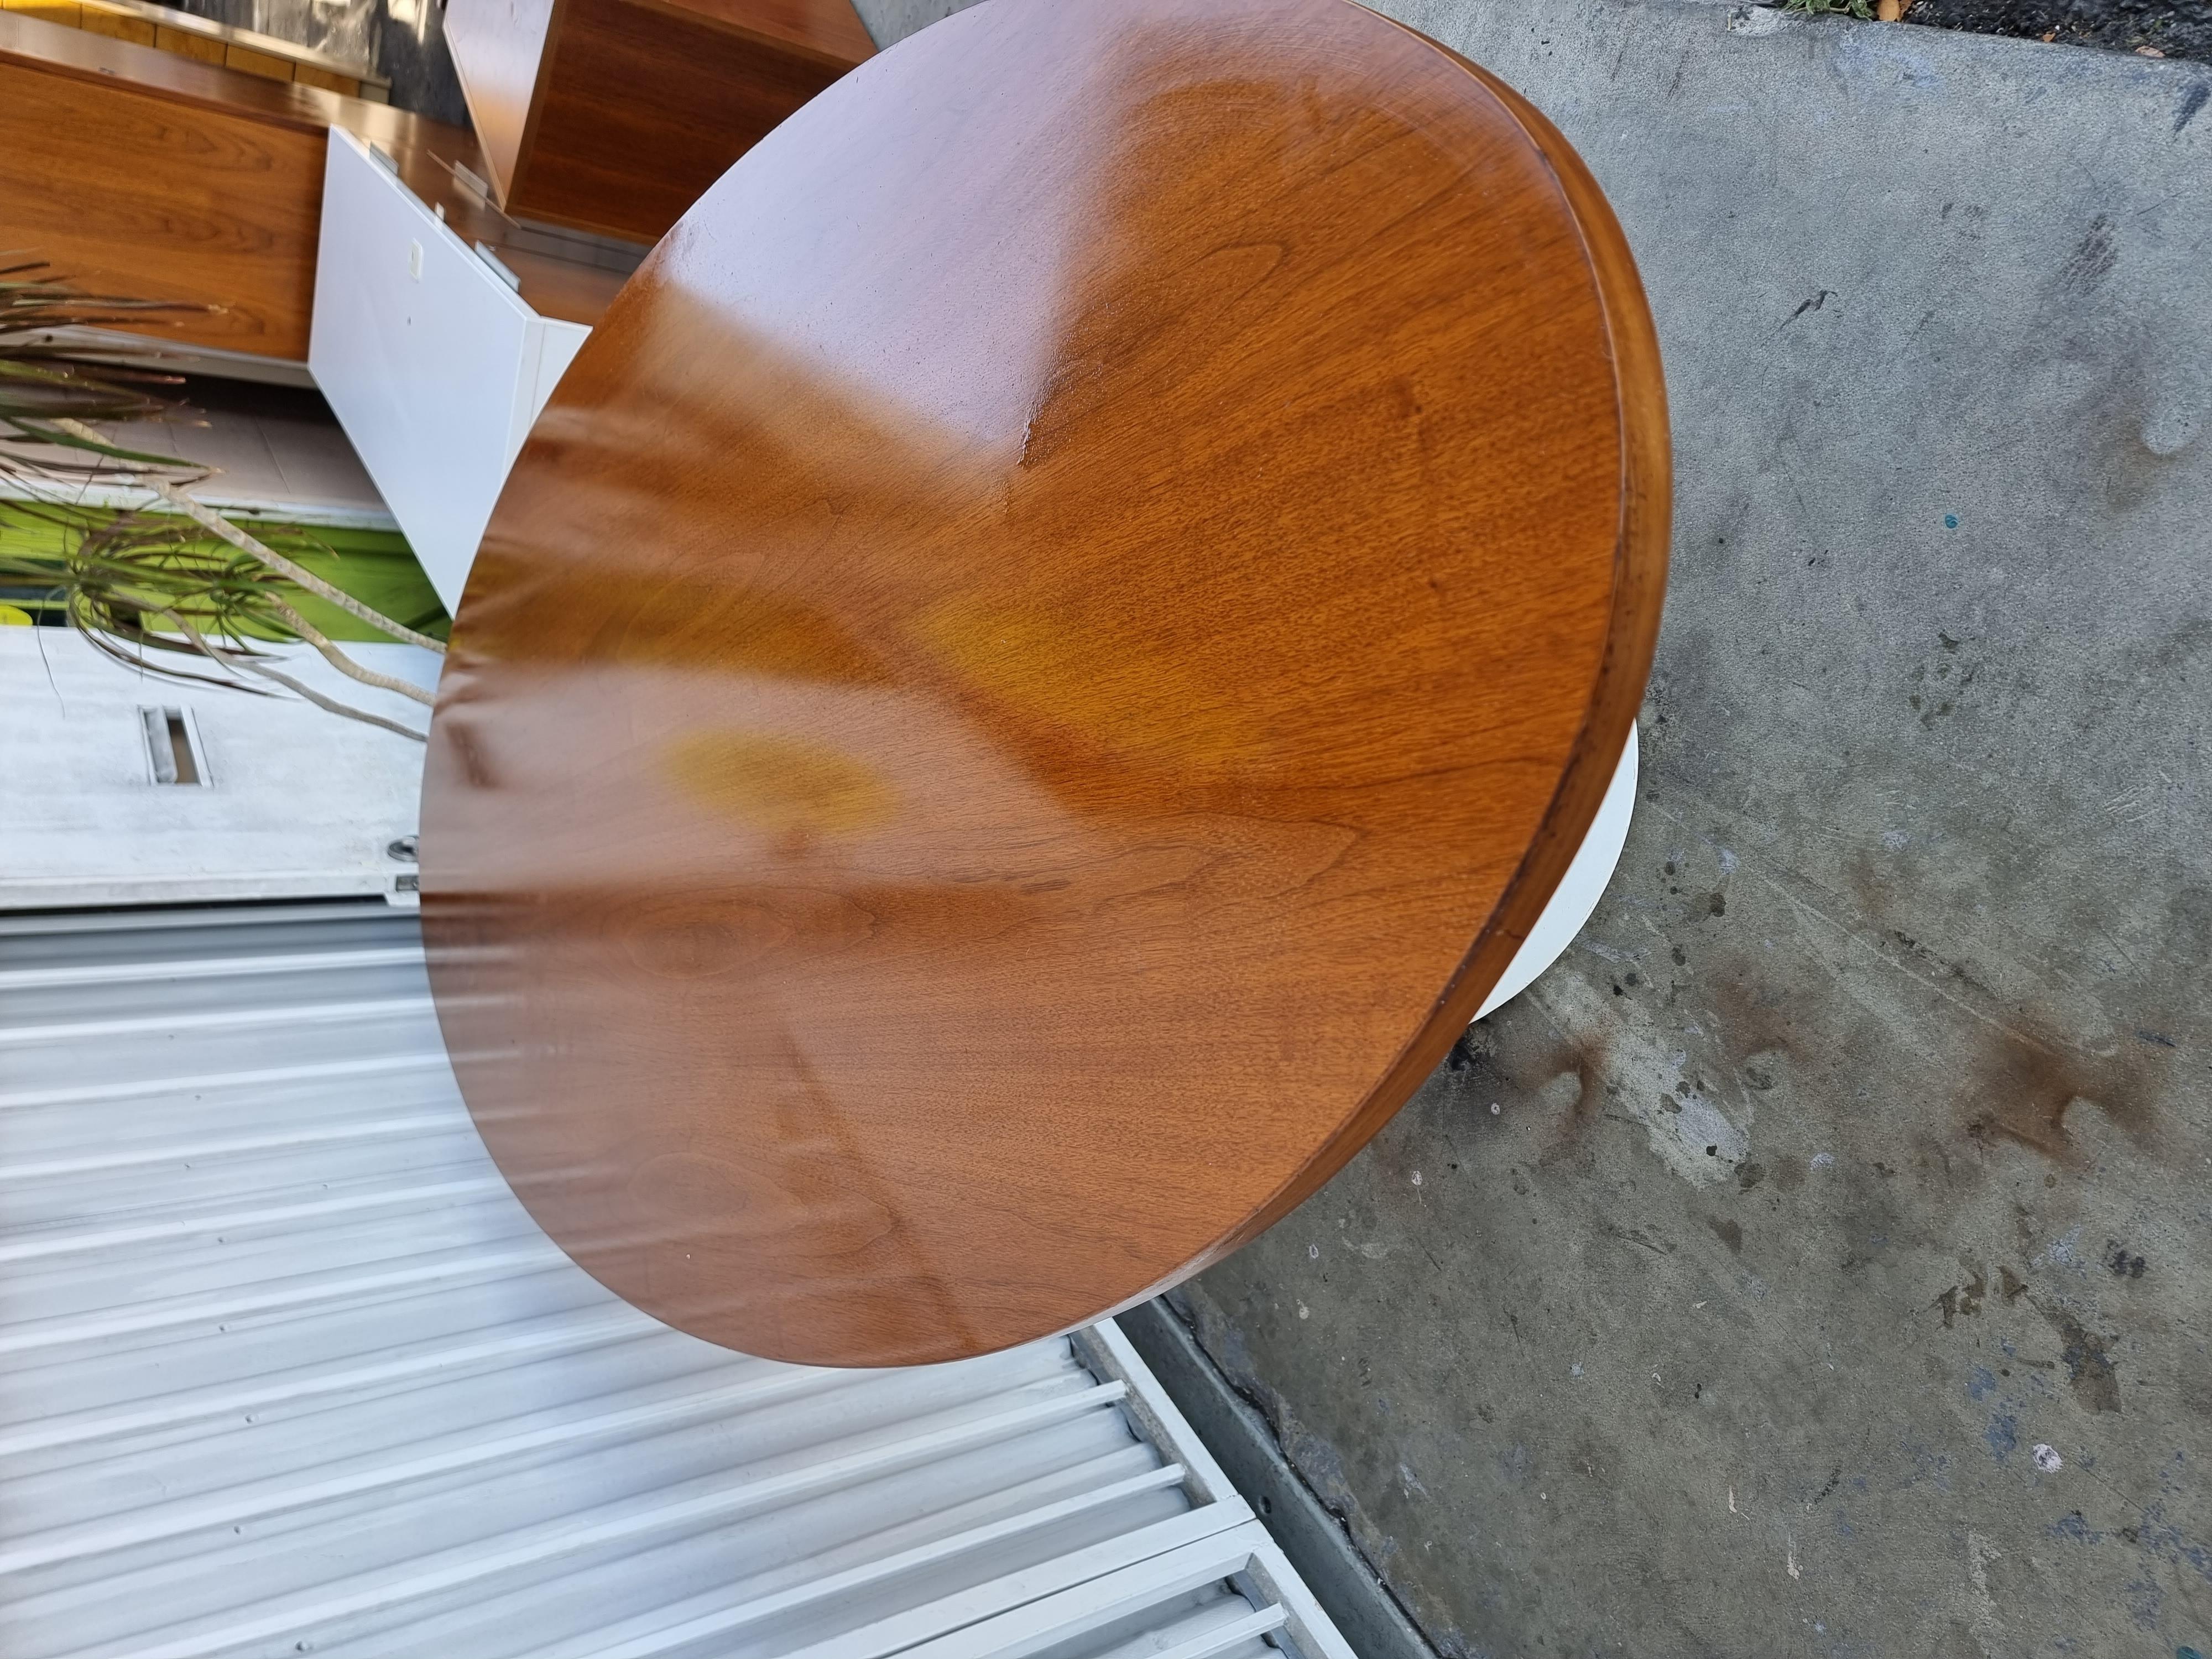 
Mid-Century Modern, Eero Saarinen tulip table manufactured by Knoll. Beautiful walnut top with satin lacquered base in antique white. Can be used as dining table, desk or conference table for the office. A timeless design that brings so much style